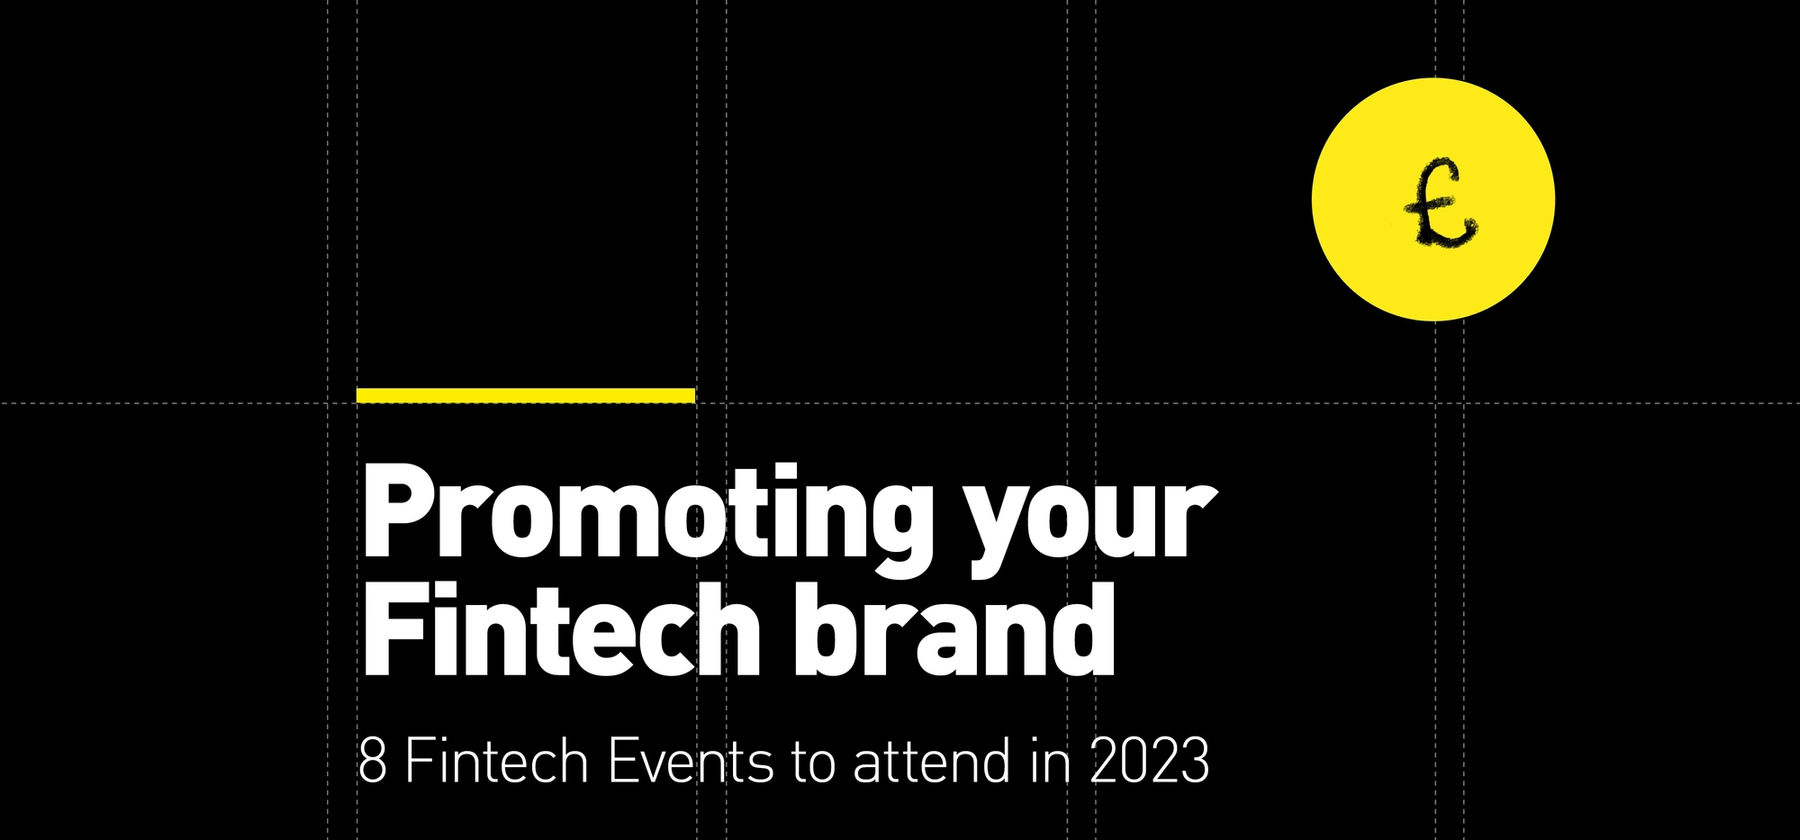 Promoting your Fintech brand - 8 Fintech Events to attend in 2023